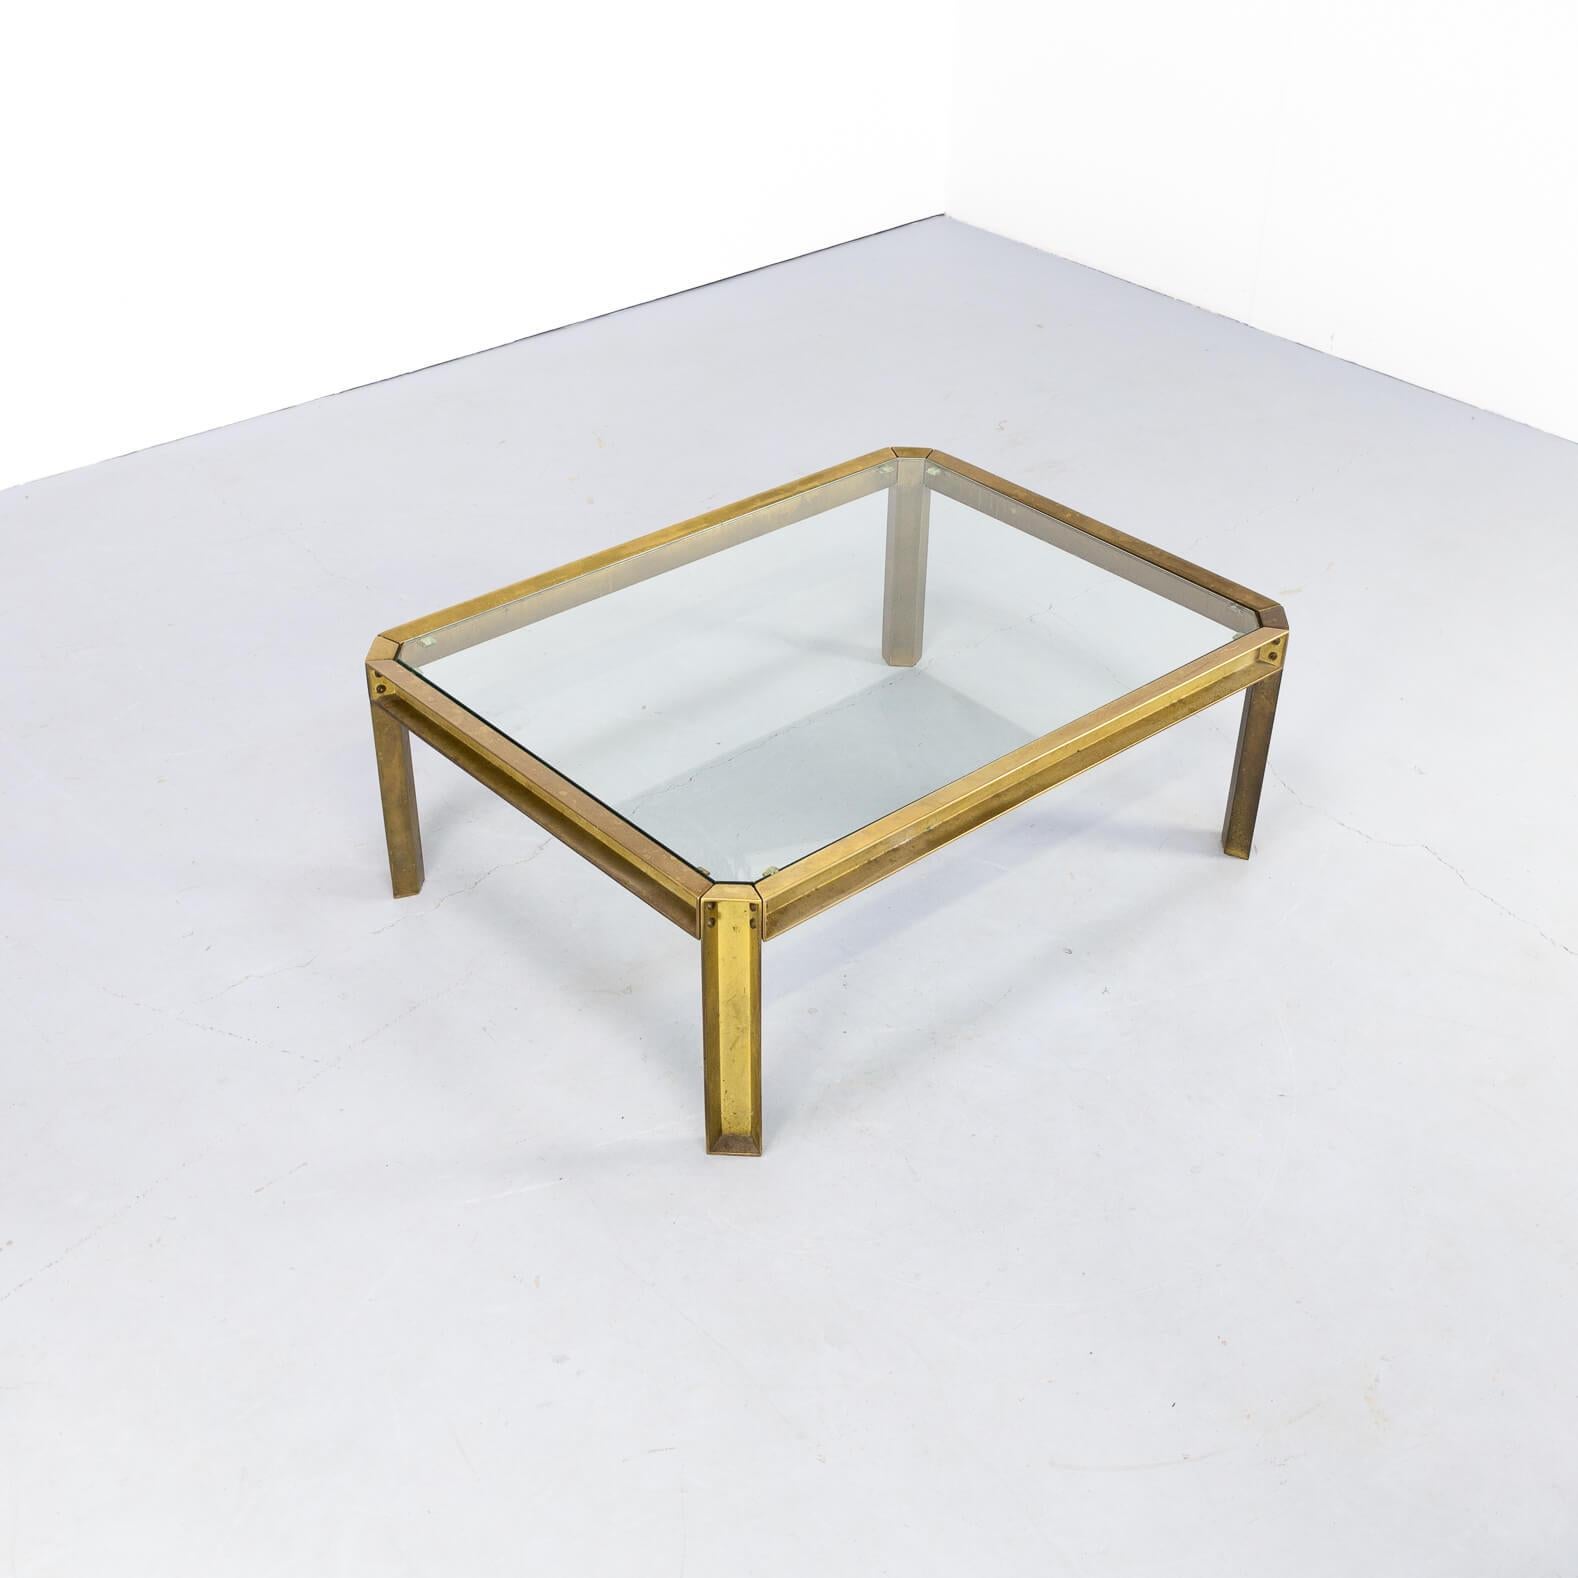 1970s Peter Ghyczy ‘T09 embassy’ Brutalist Brass and Glass Coffee Table In Good Condition For Sale In Amstelveen, Noord